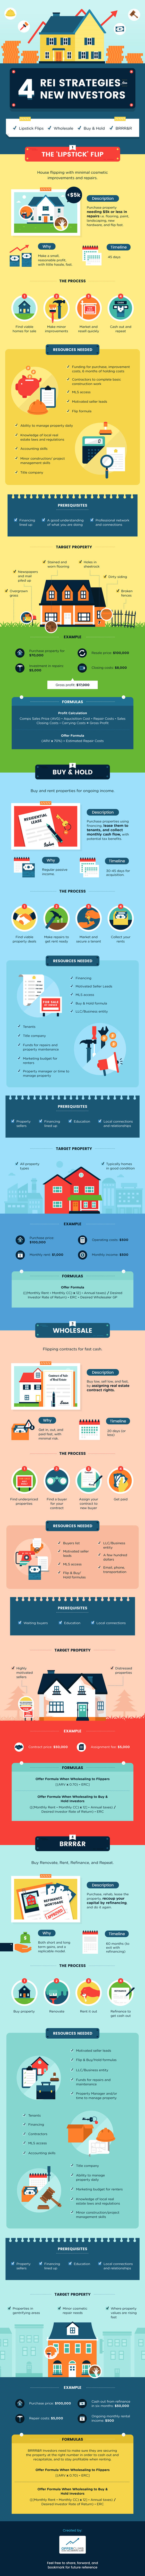 Real Estate Investing infographic